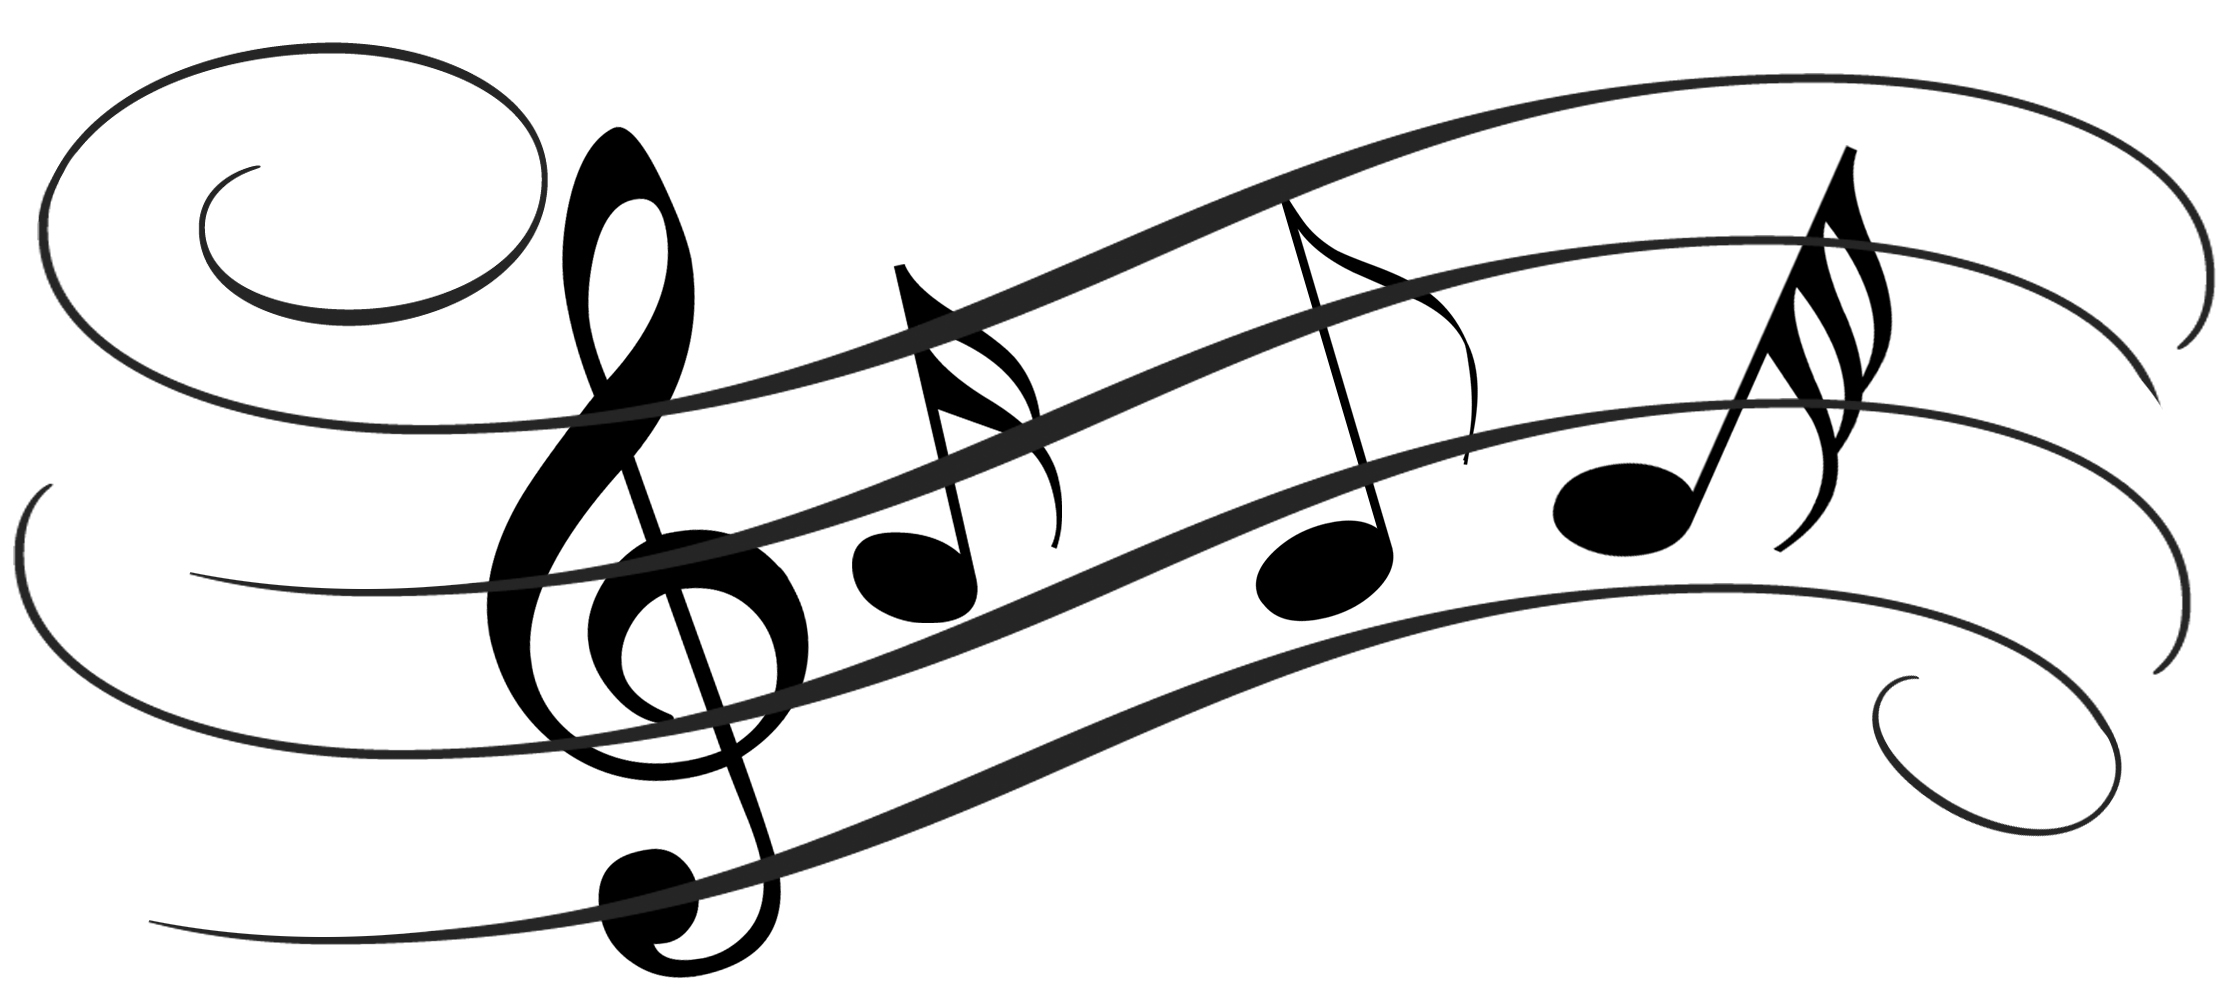 music notes on staff clipart - Music Clipart